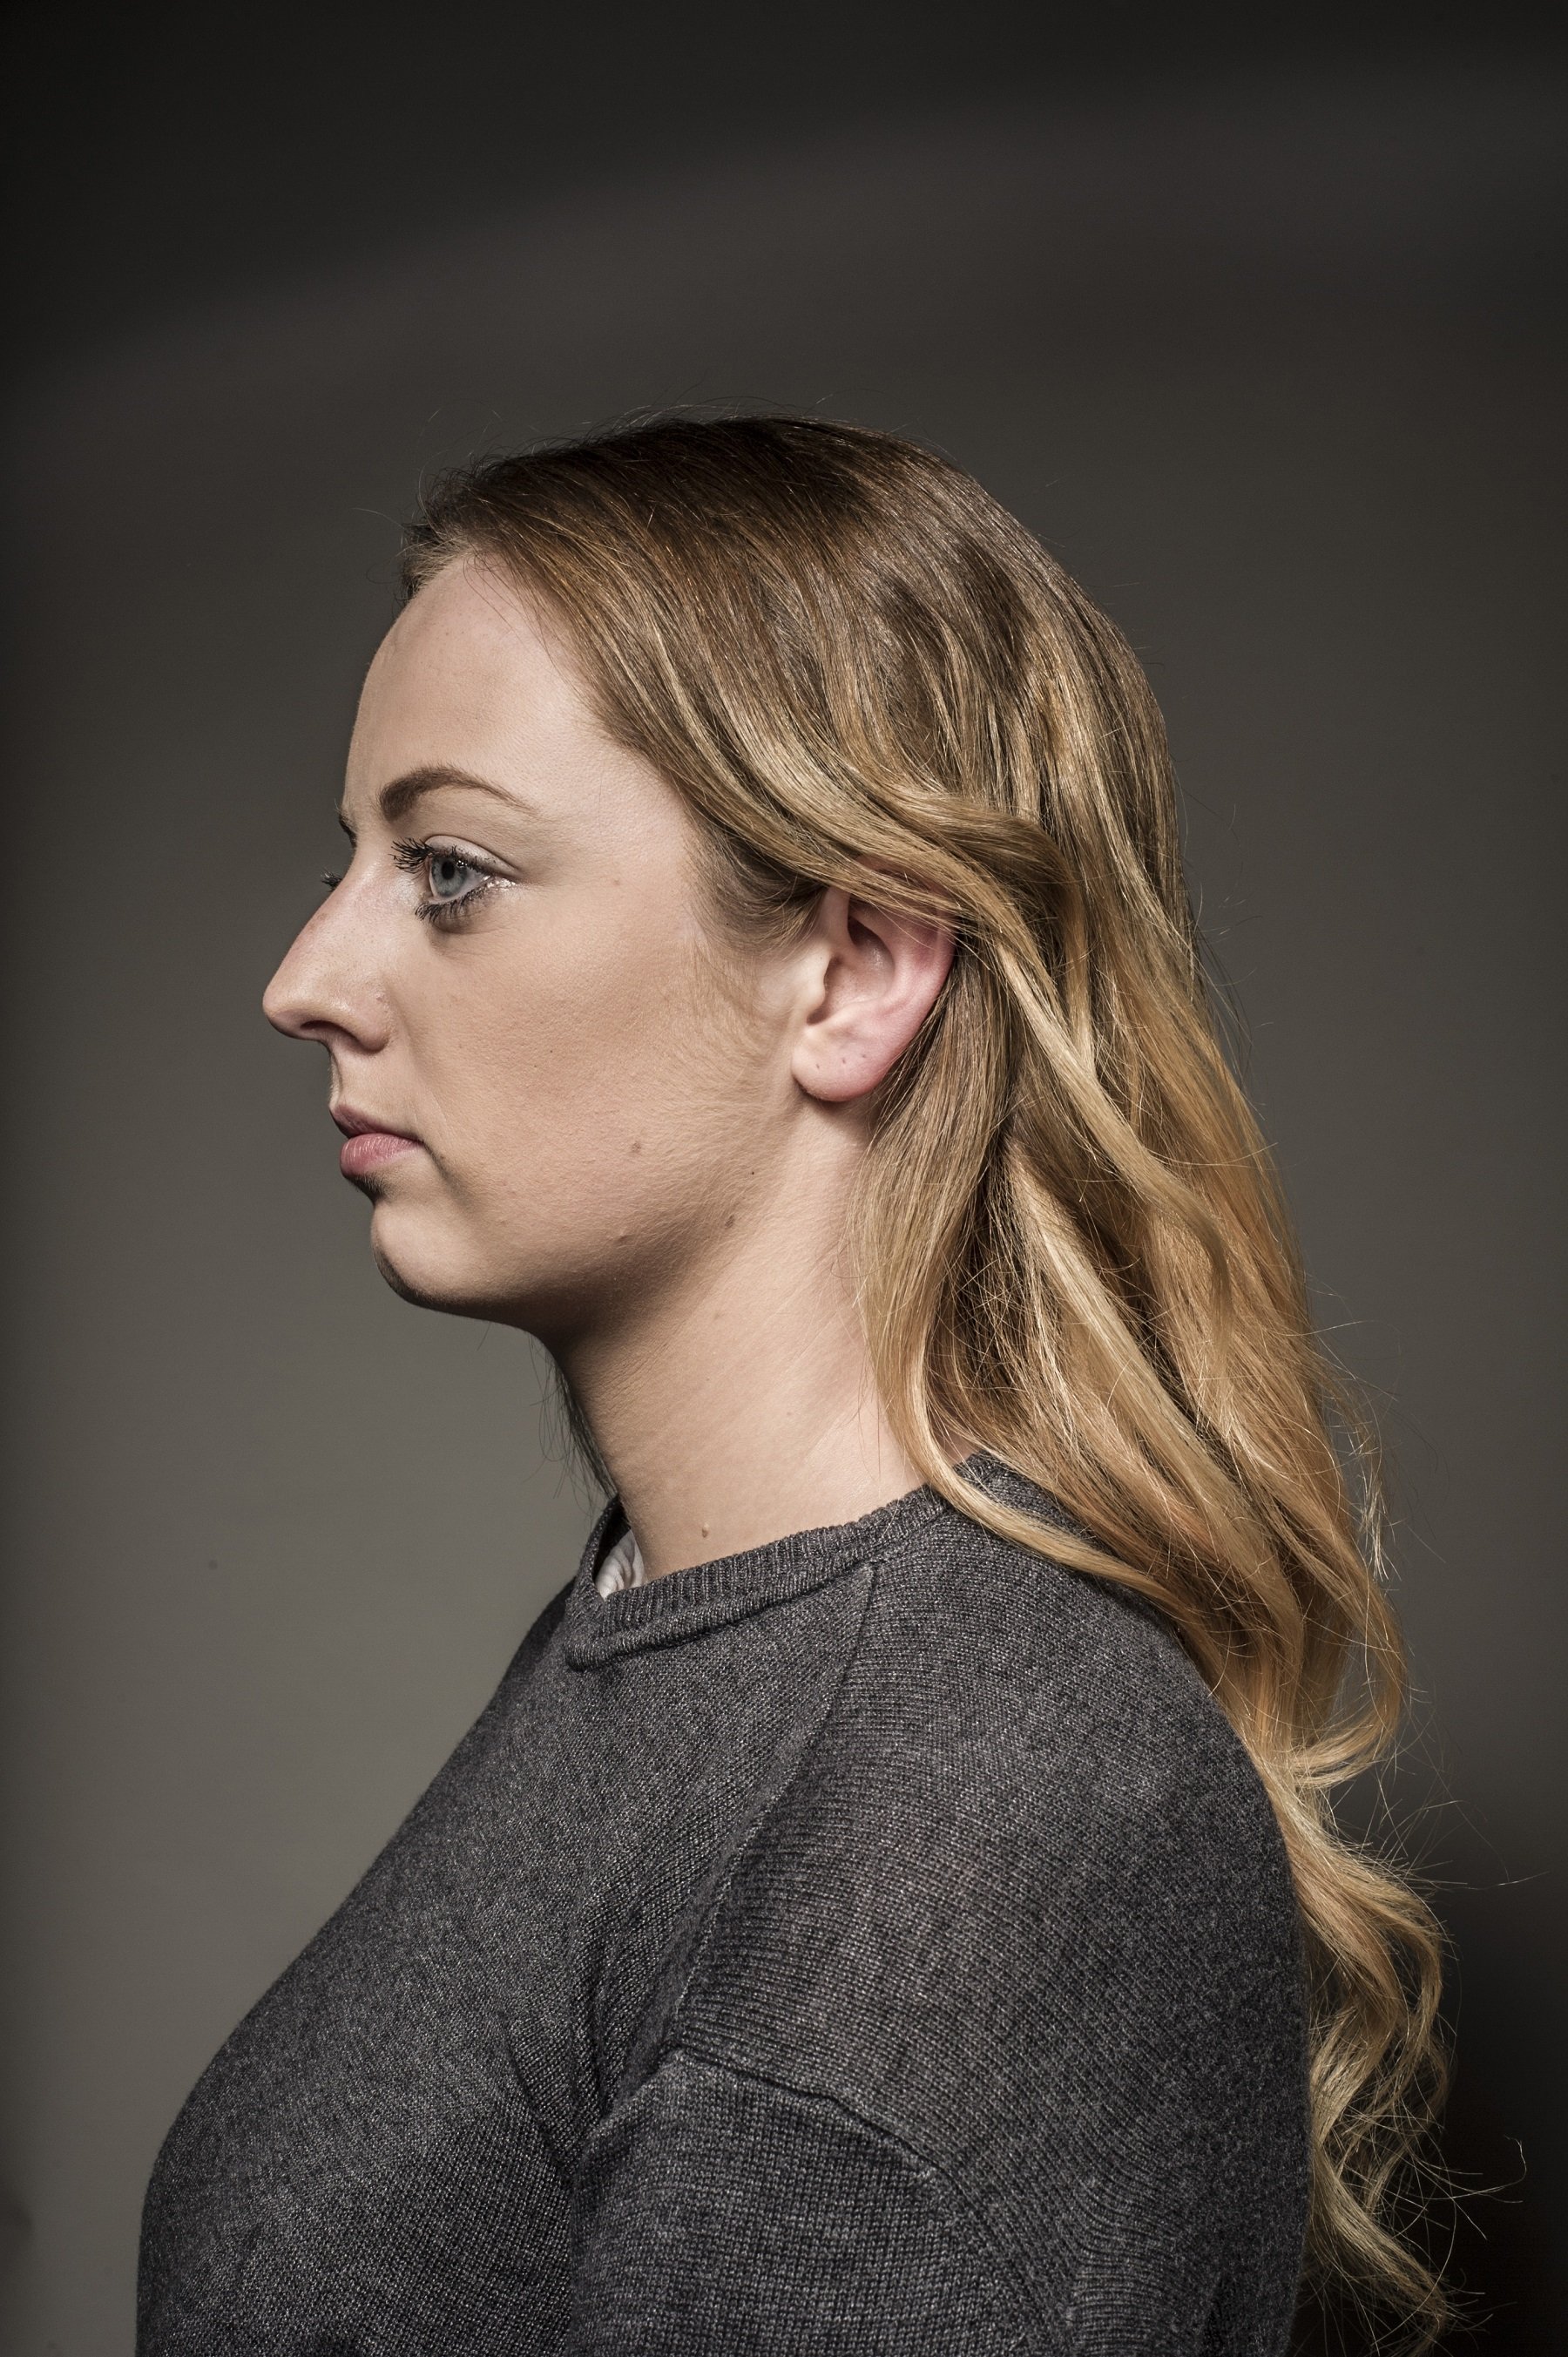 Profile of blonde woman